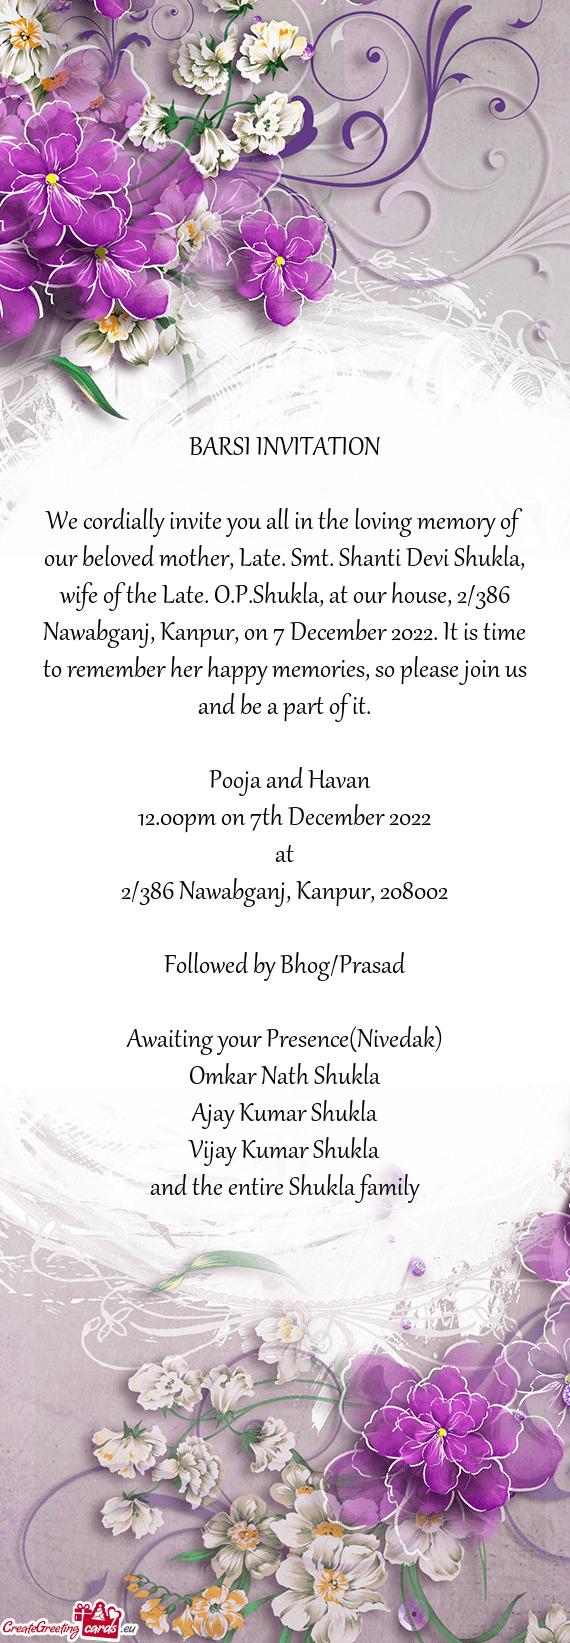 We cordially invite you all in the loving memory of our beloved mother, Late. Smt. Shanti Devi Shukl